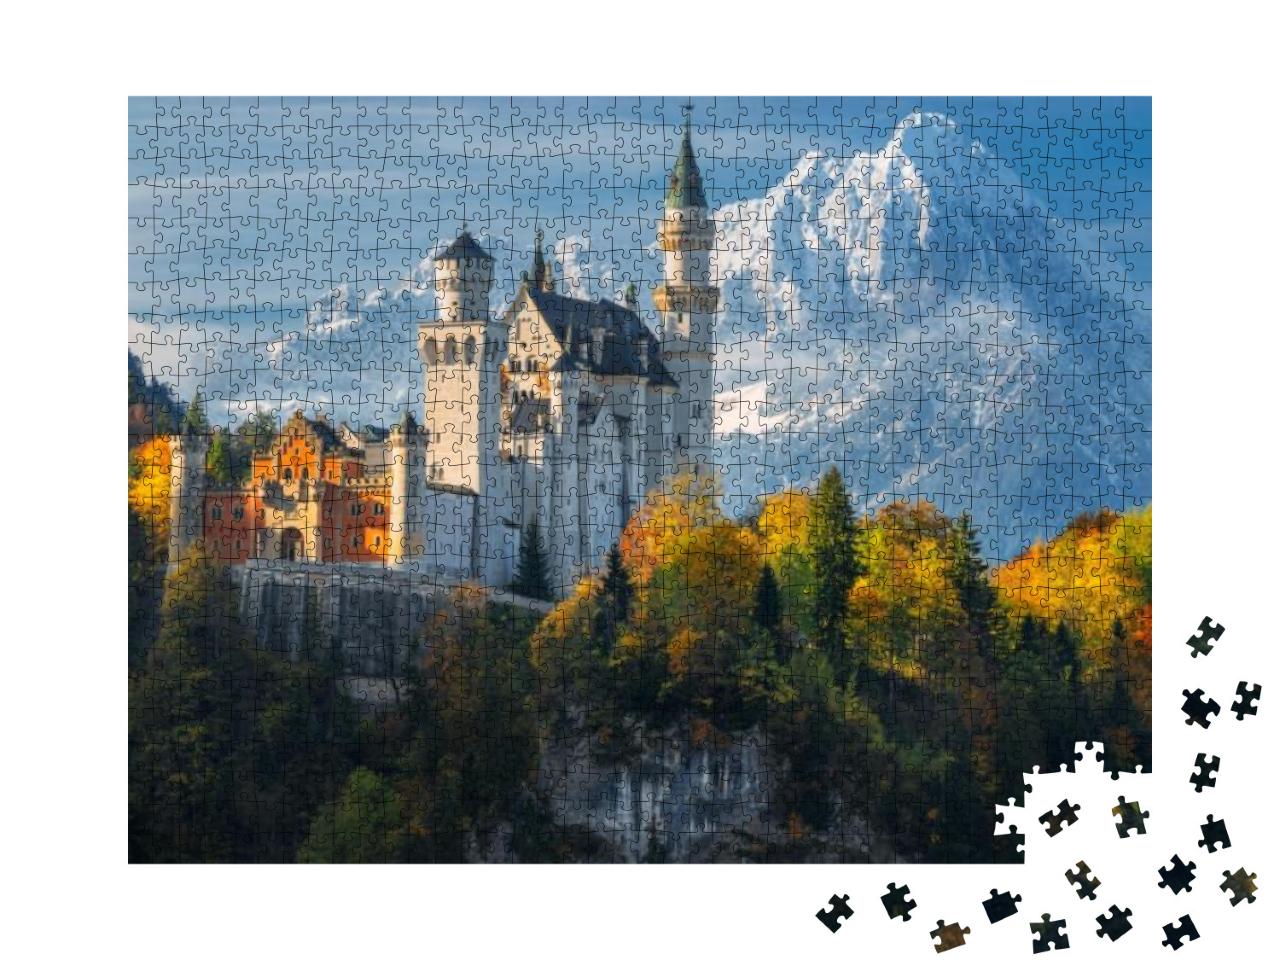 Germany. Famous Neuschwanstein Castle in the Background o... Jigsaw Puzzle with 1000 pieces